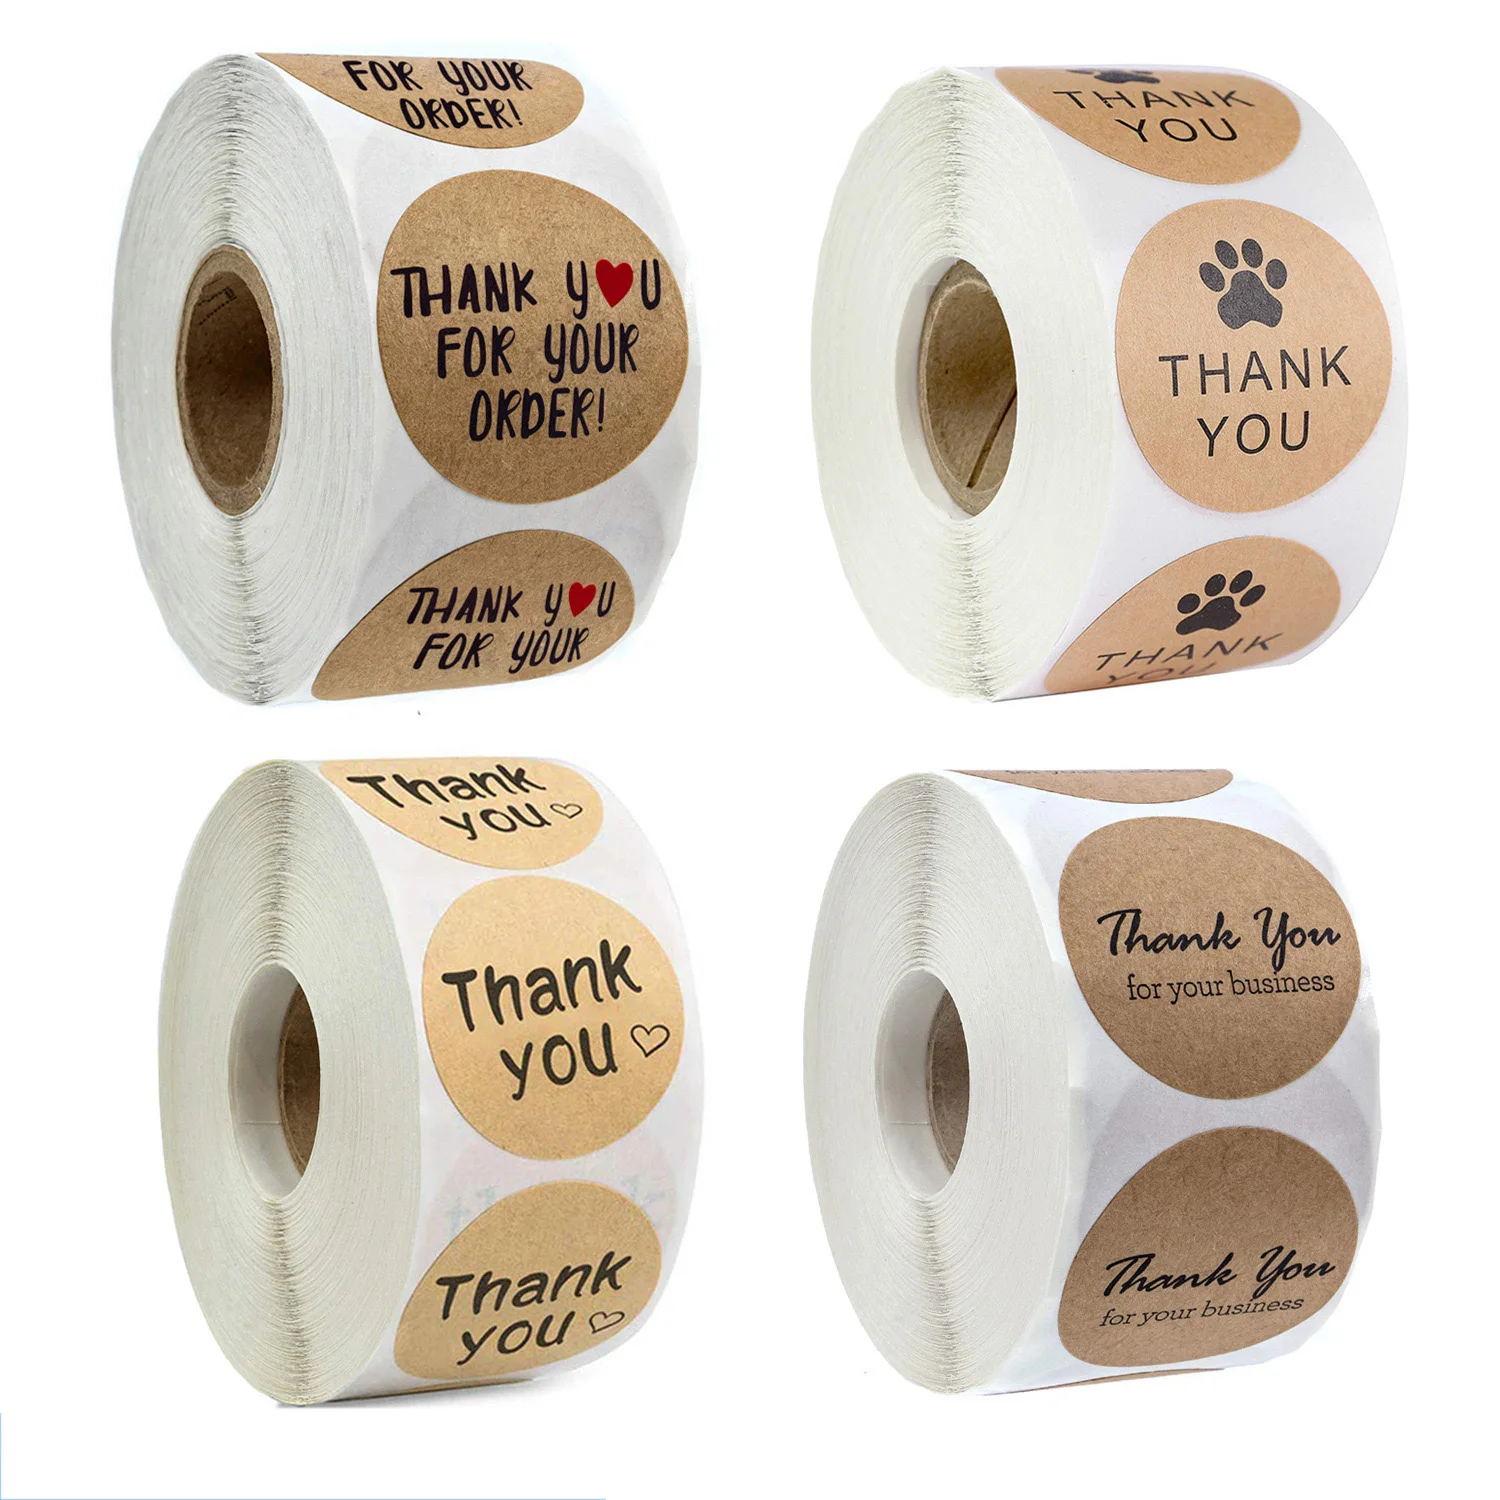 Boutiques and Envelope Boxes Shops to Use on Bags 1 Inch Round Kraft Paper Thank You Label Tags for Business Online Retailers 500Pcs Handmade with Love Thank You Stickers 